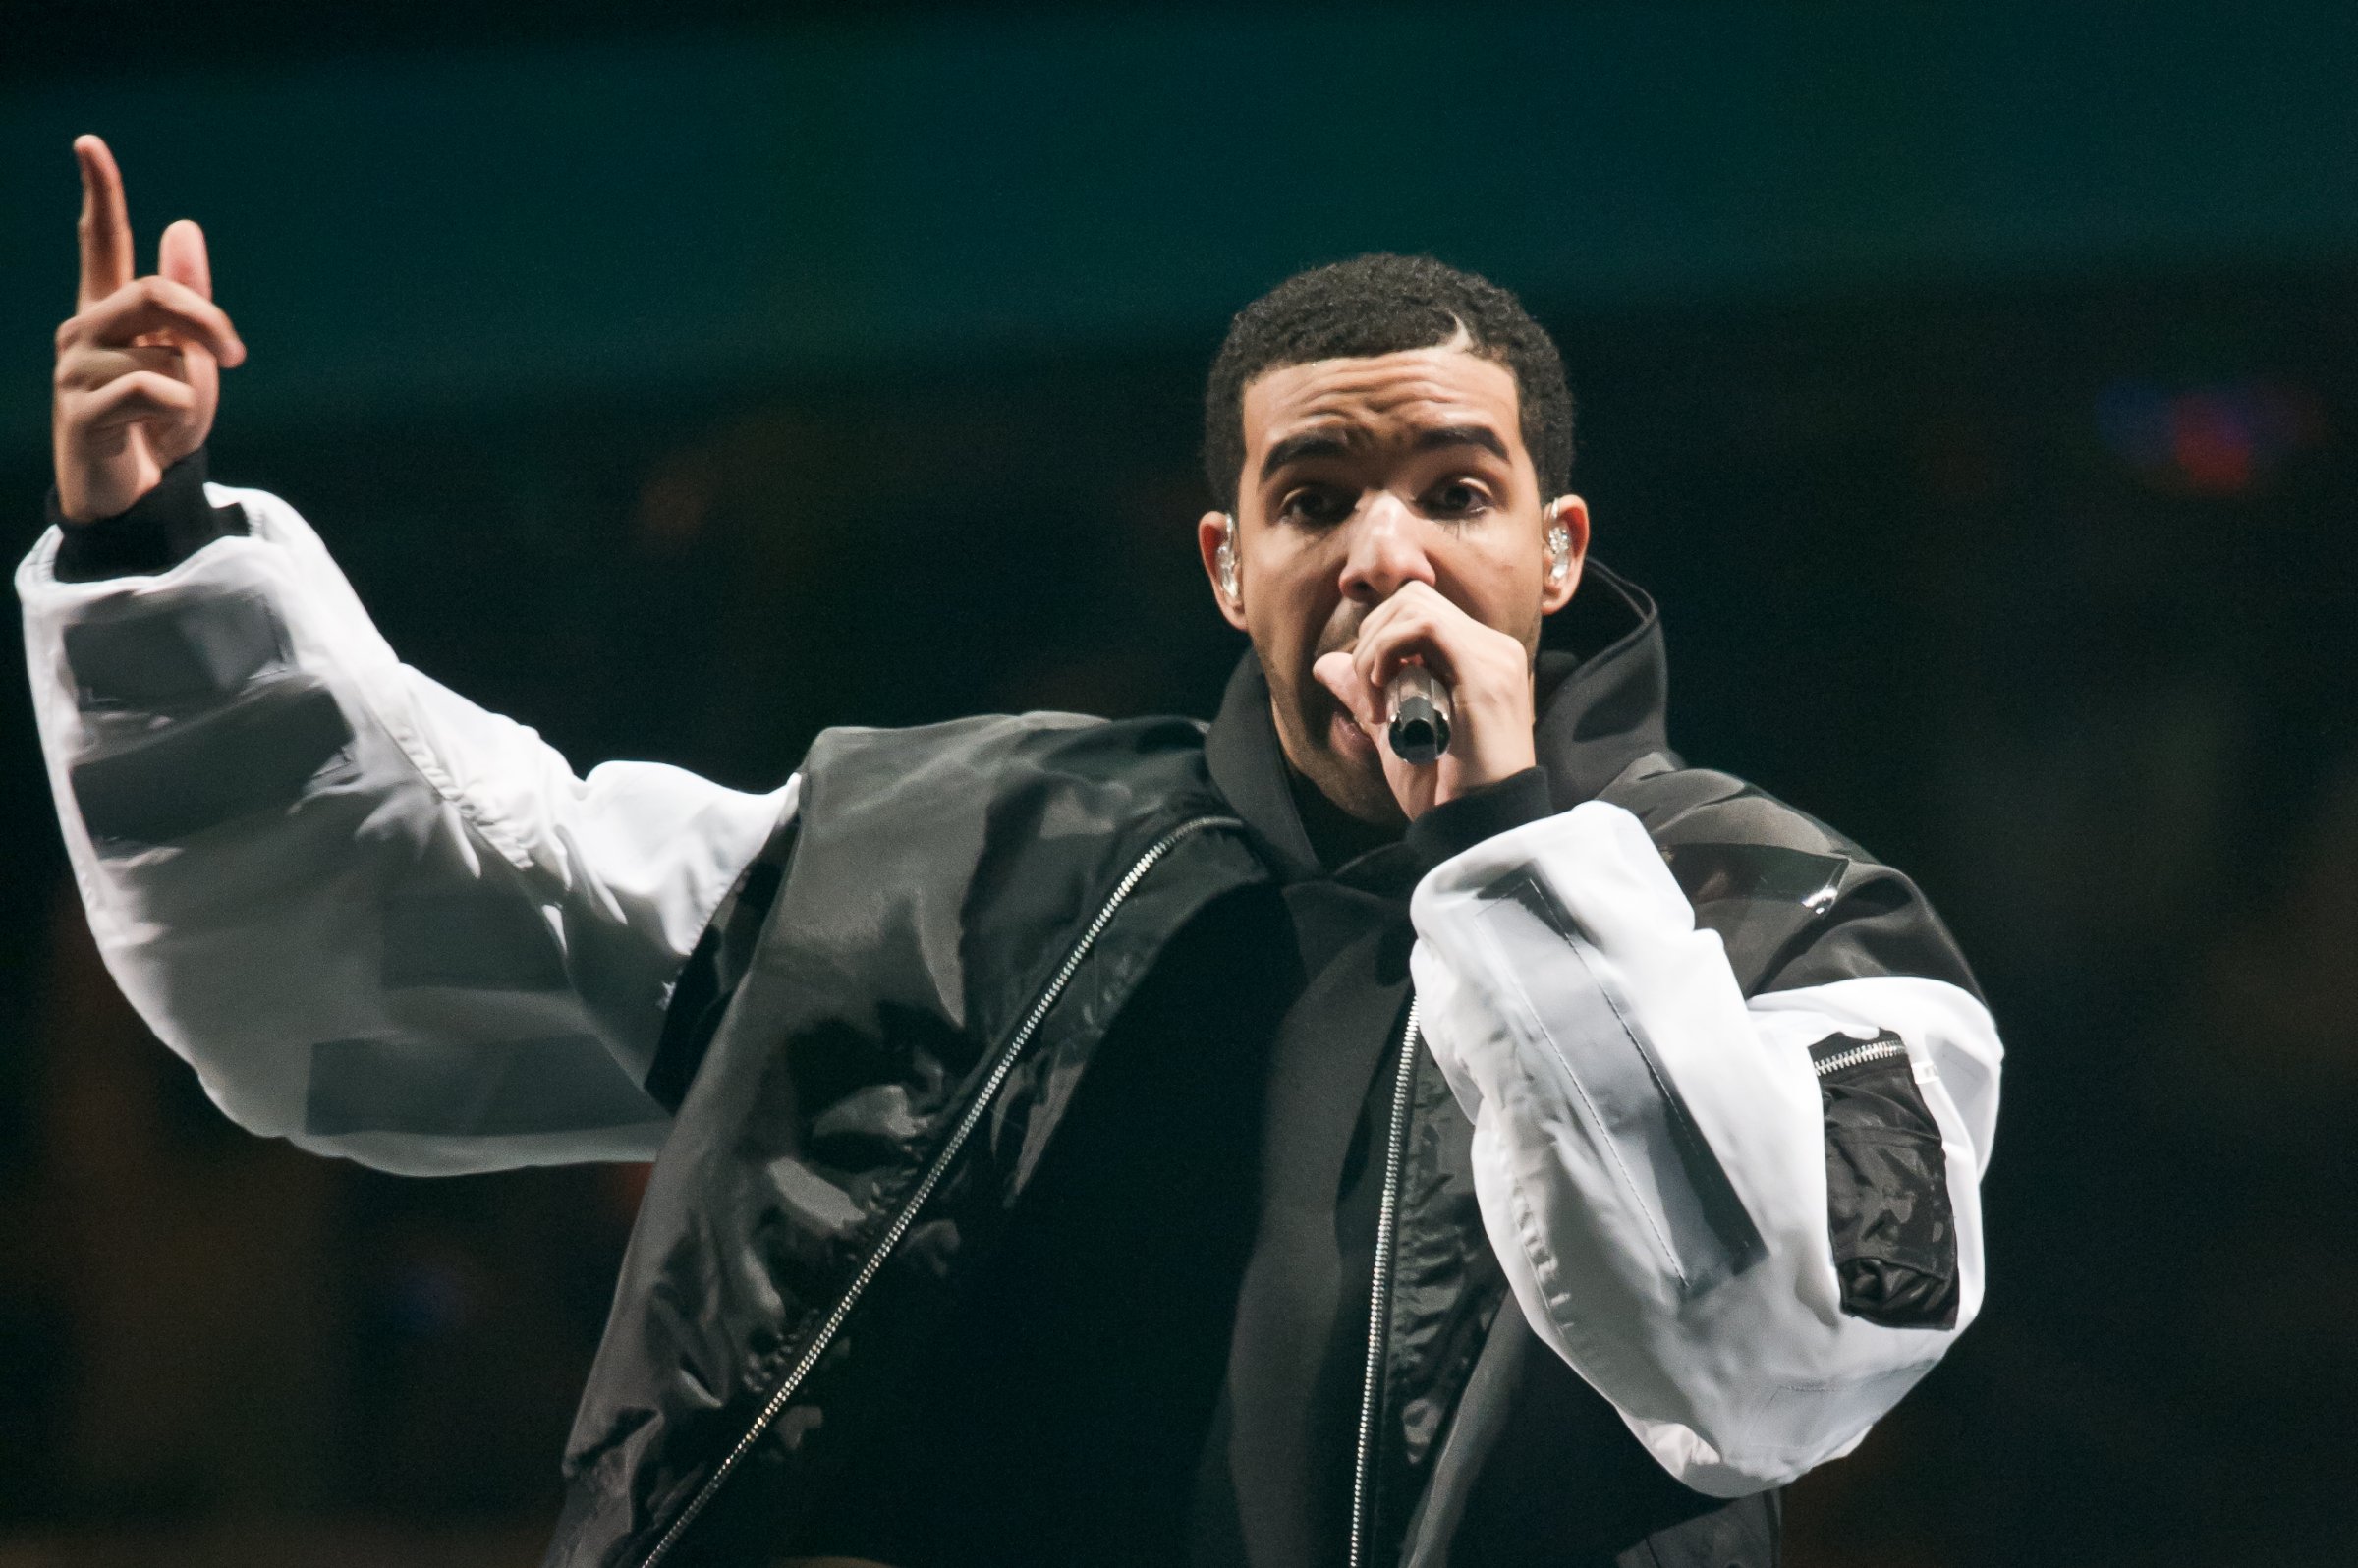 Drake performs on stage at O2 Arena on March 24, 2014 in London.